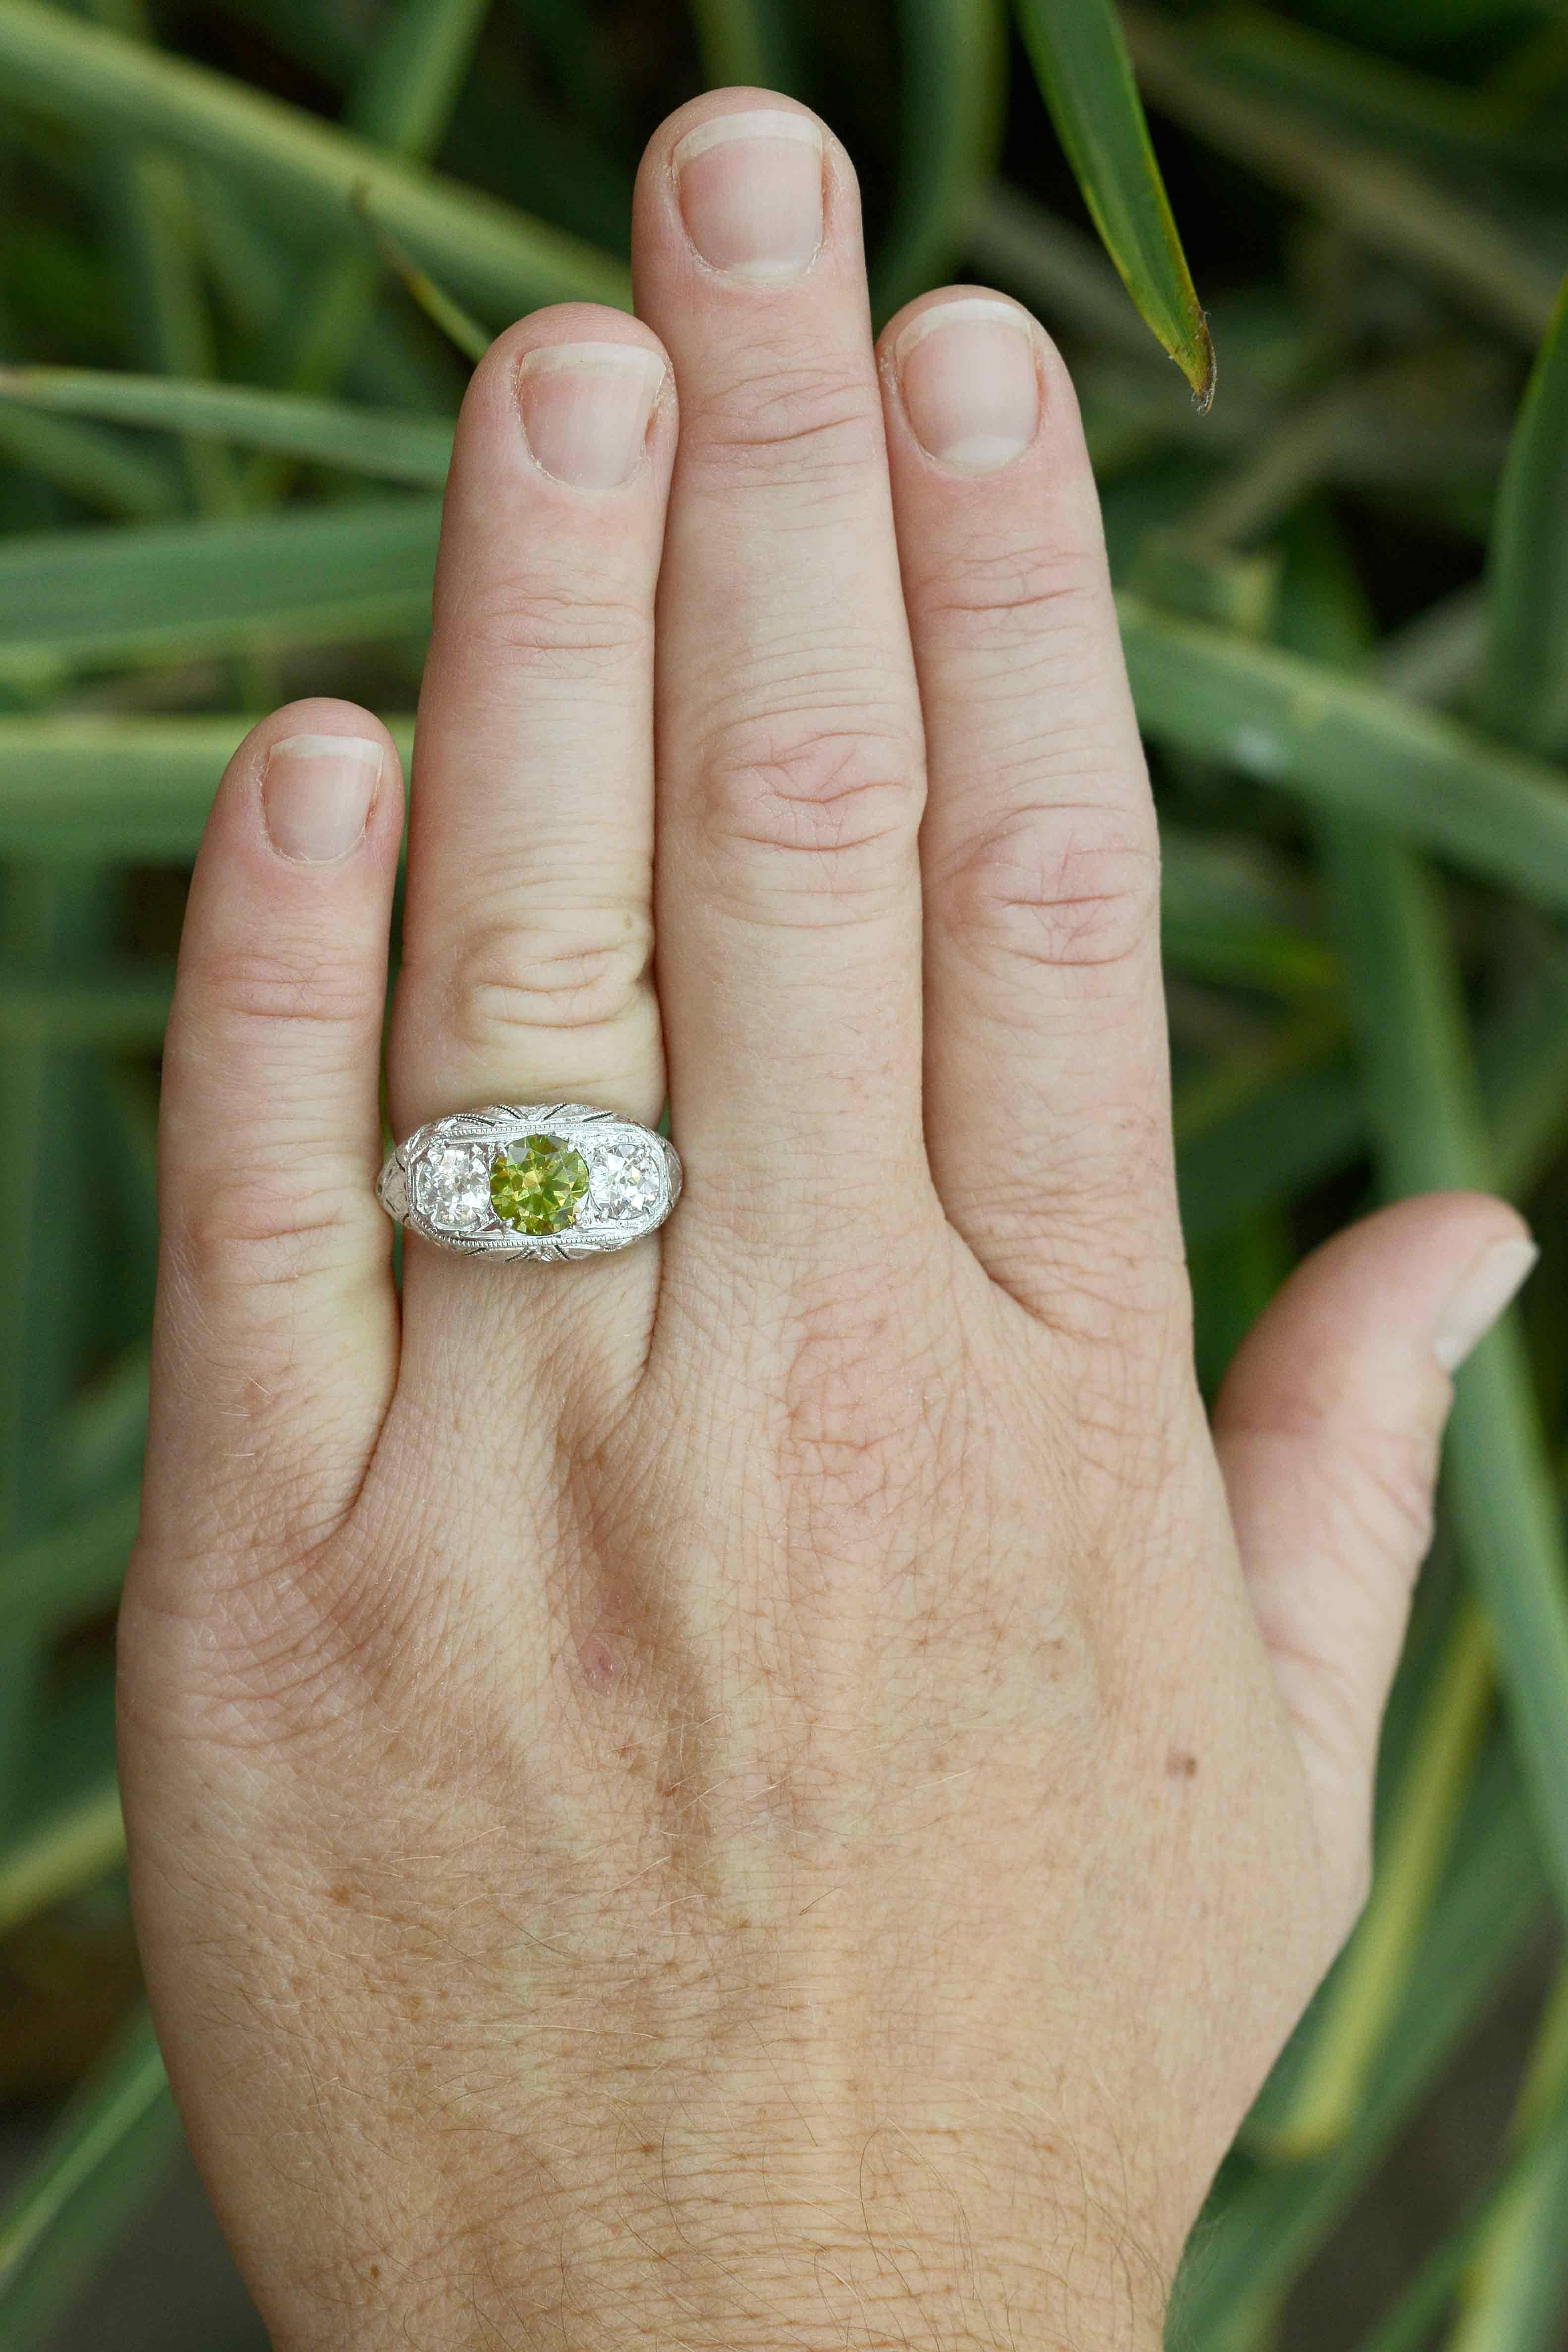 An alluring, exotic Art Deco Russian demantoid garnet and diamond three stone engagement ring. Rare, green garnets are seldom found in this size. At 1.50 carats and with a lush, vivid olive green, enticingly set between a pair of chunky, sparkling